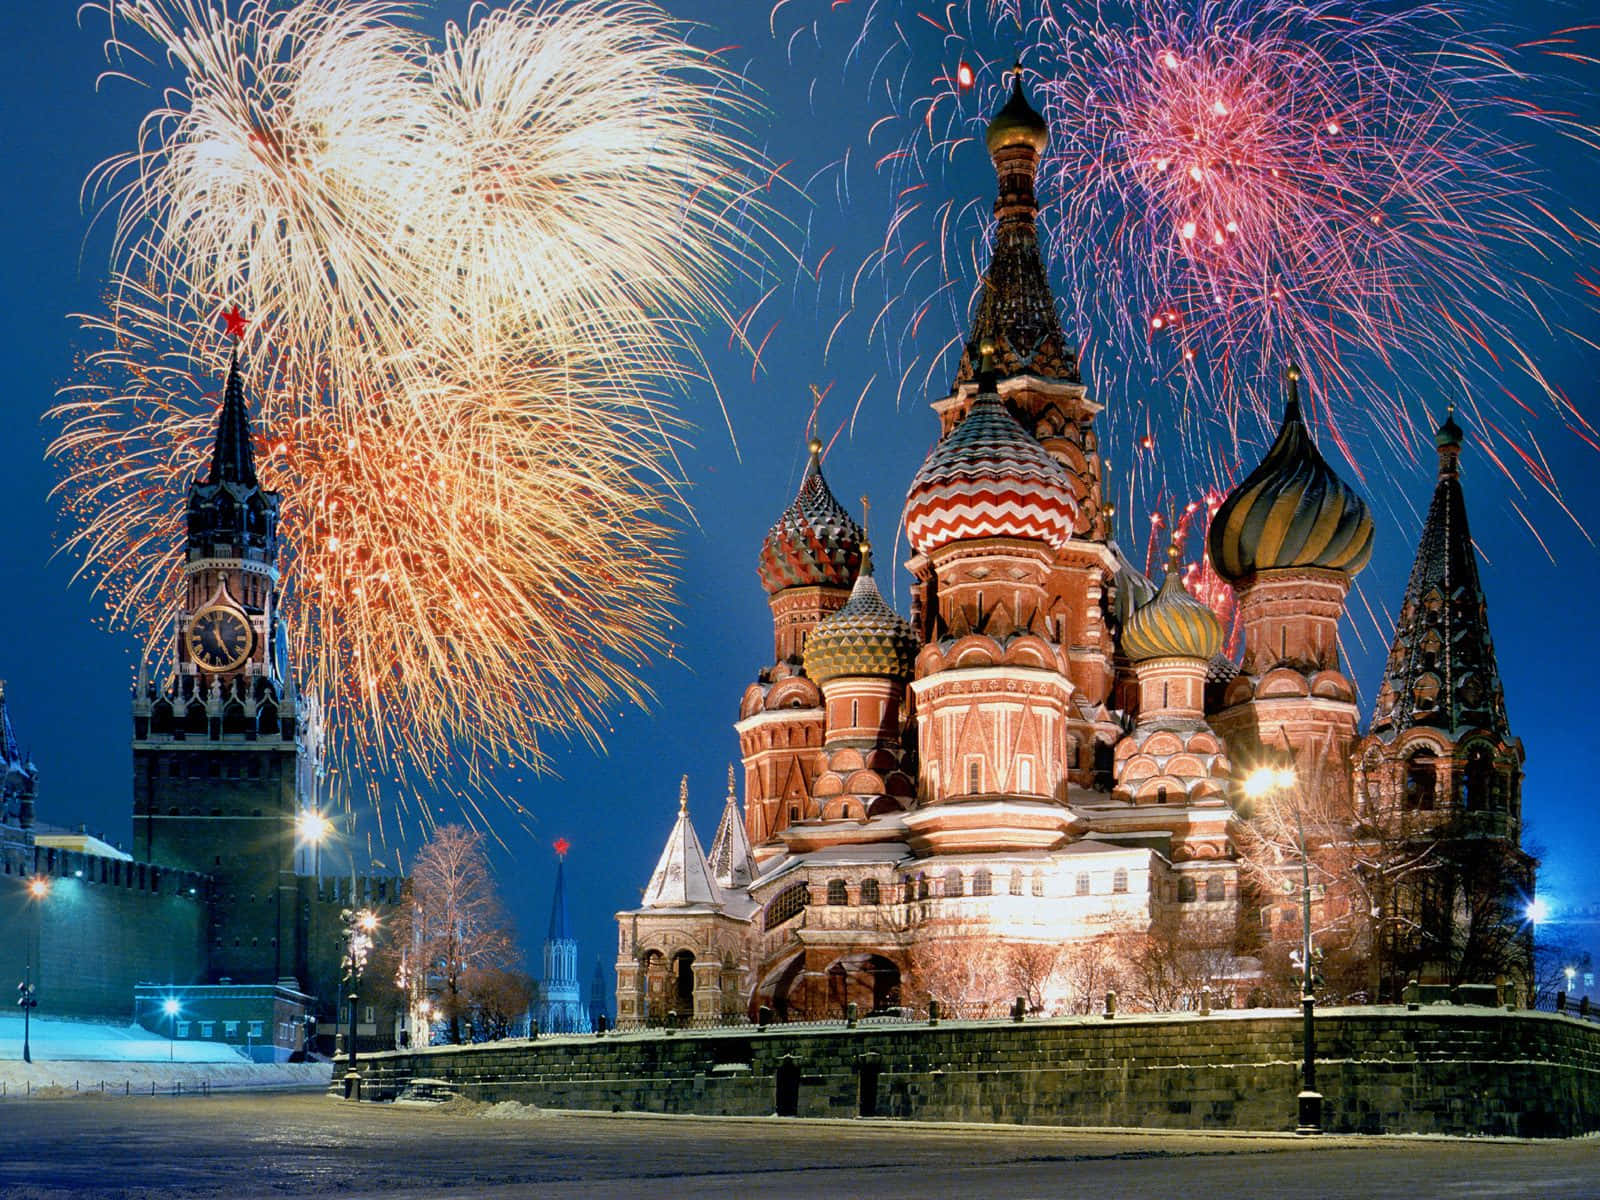 "The Saint Basil's Cathedral Illuminated by Fireworks Display" Wallpaper